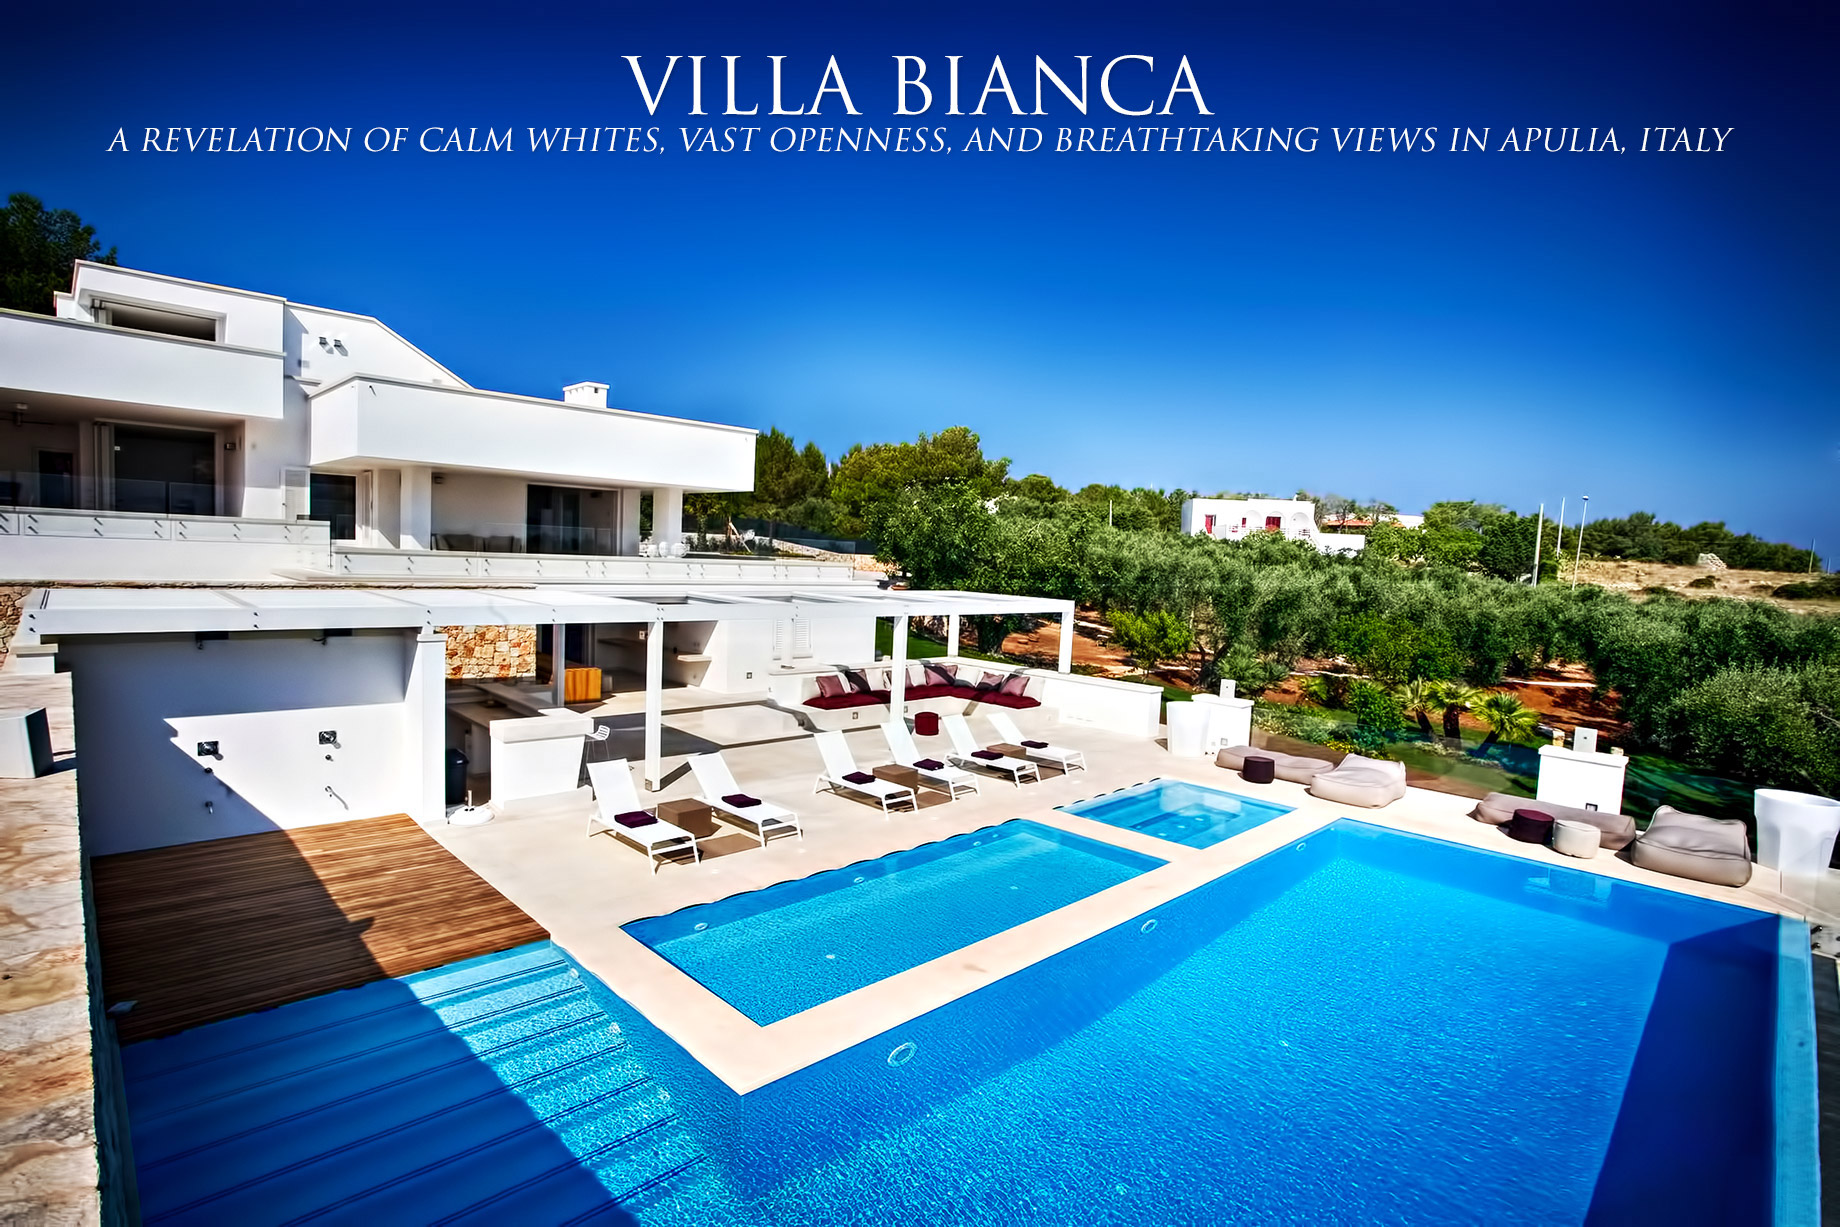 Villa Bianca – A Revelation of Calm Whites, Vast Openness, and Breathtaking Views in Apulia, Italy